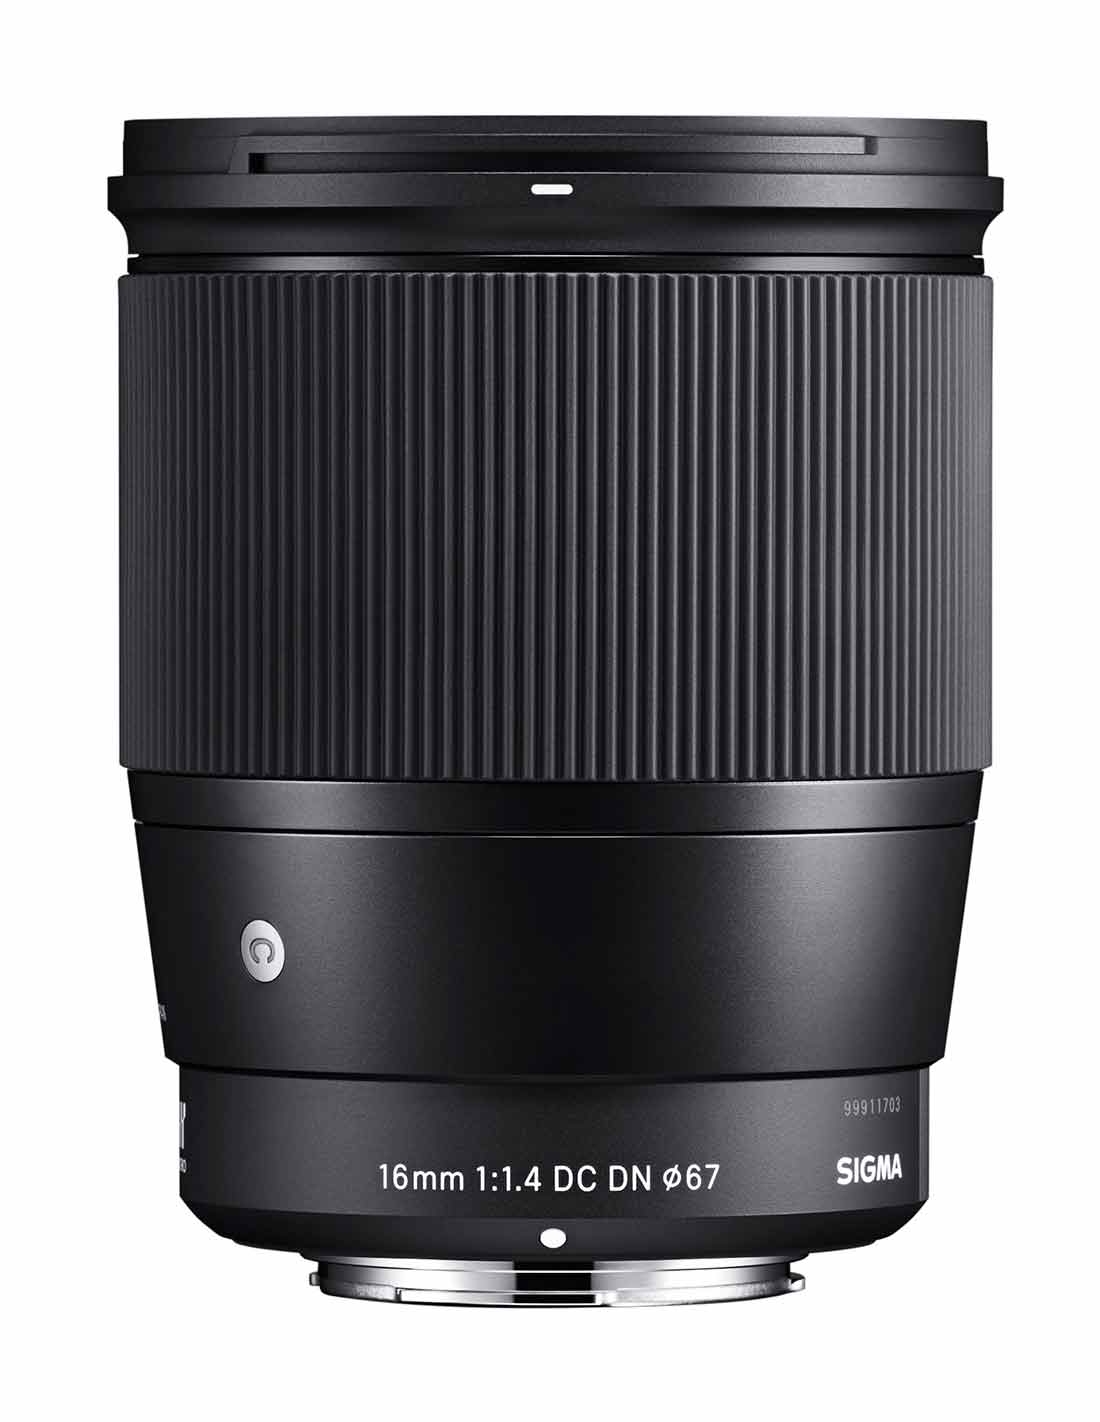 SIGMA 16mm F1.4 DC DN (ソニーEマウント) | www.causus.be